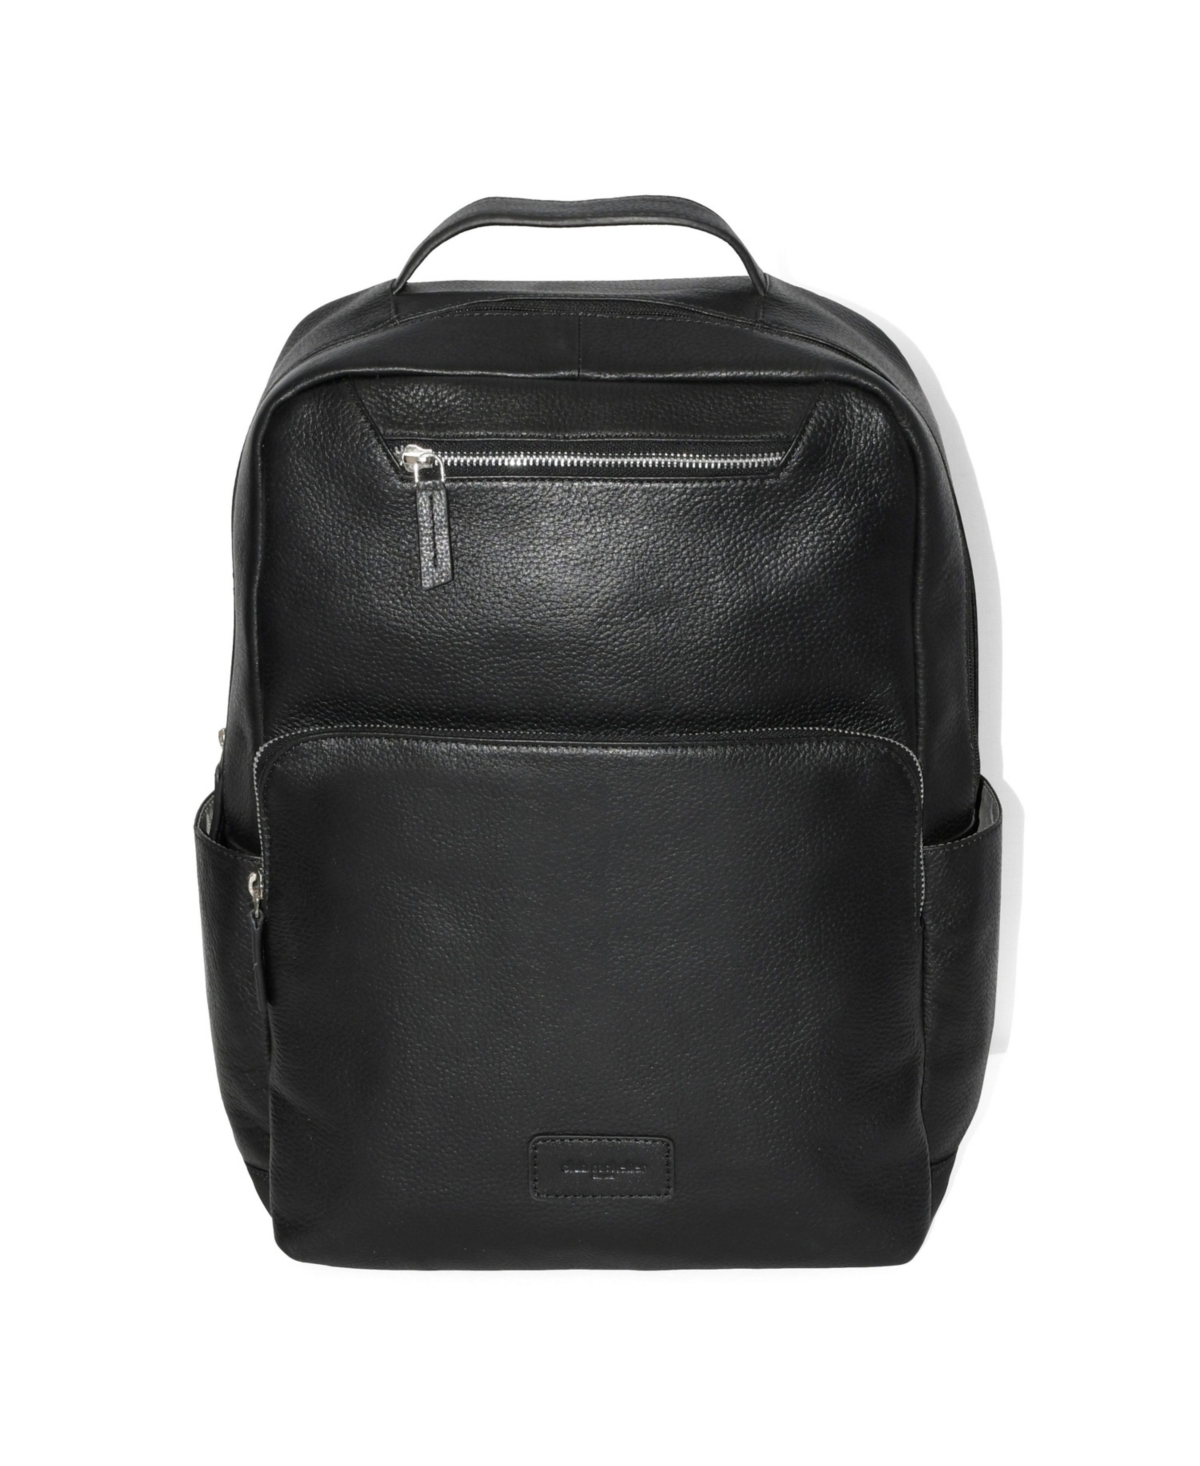 CLUB ROCHELIER LEATHER DUAL FRONT ORGANIZER BACKPACK